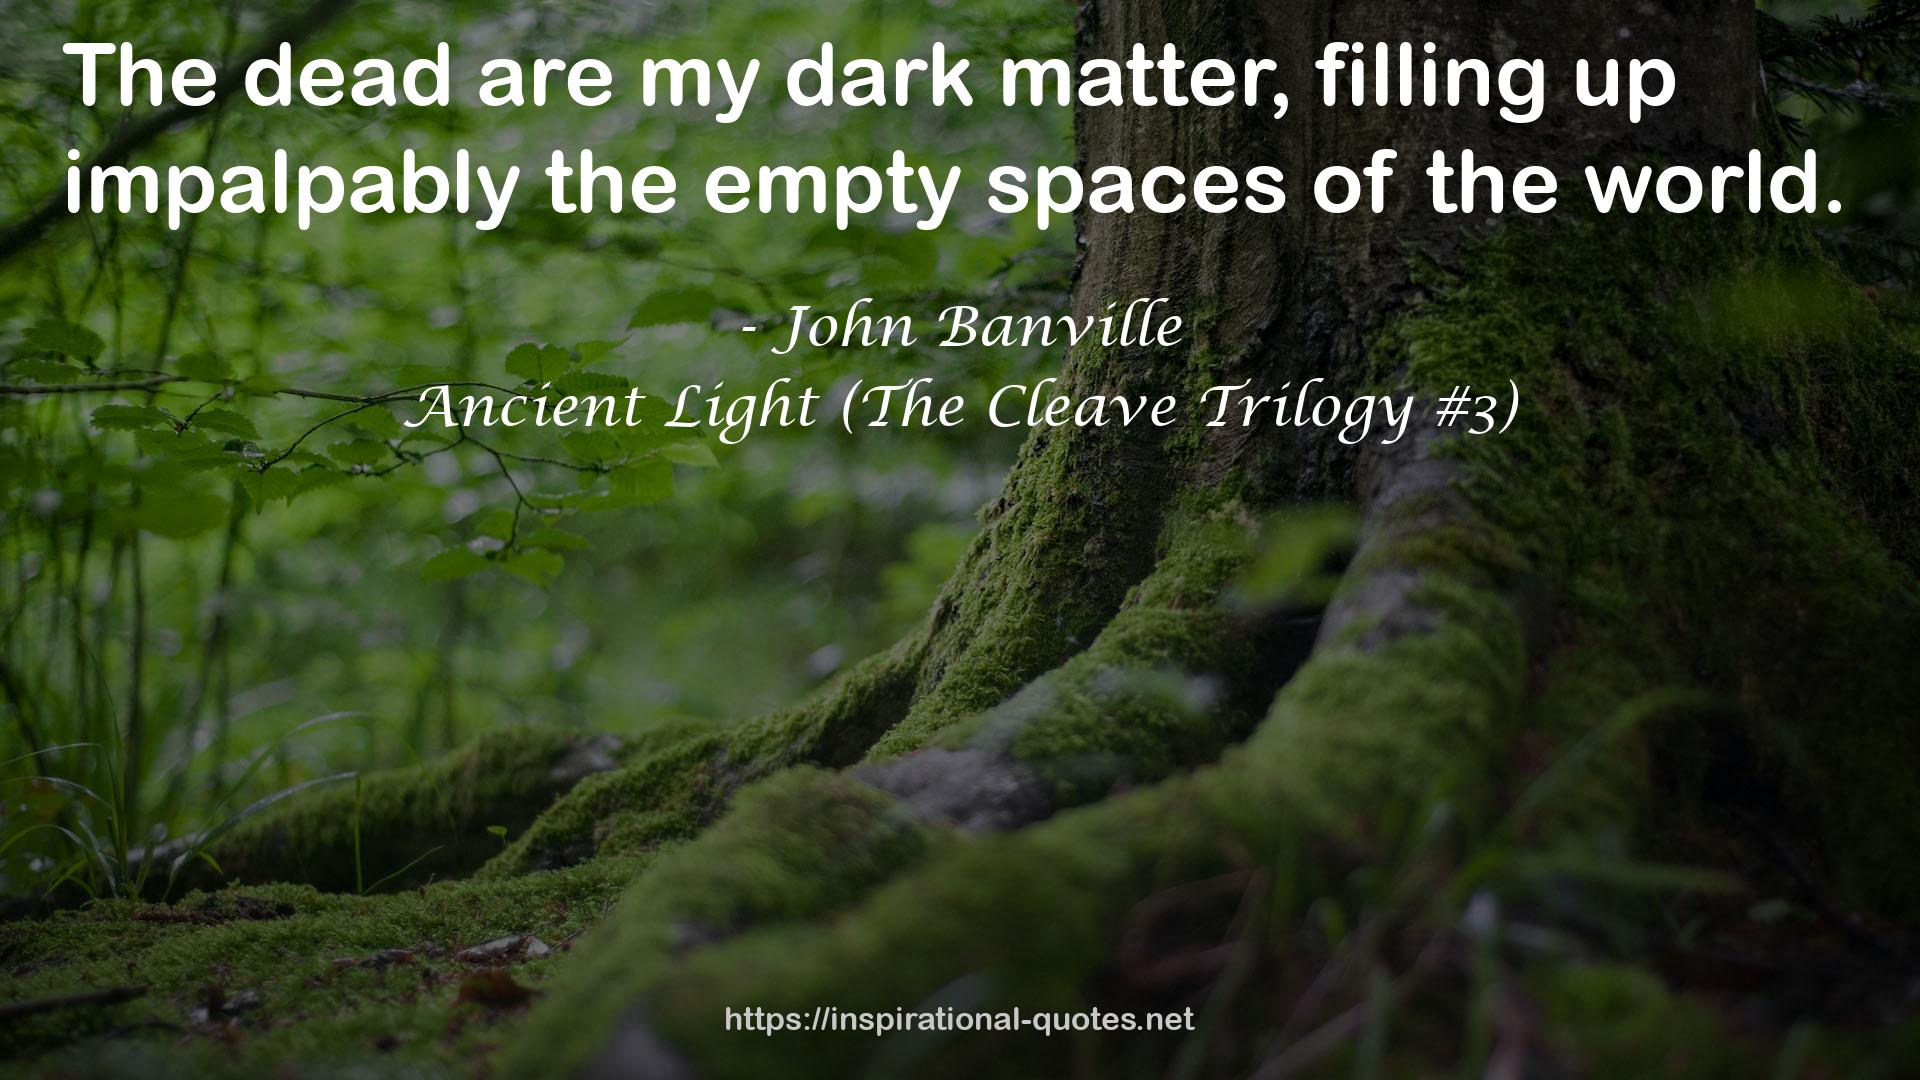 Ancient Light (The Cleave Trilogy #3) QUOTES